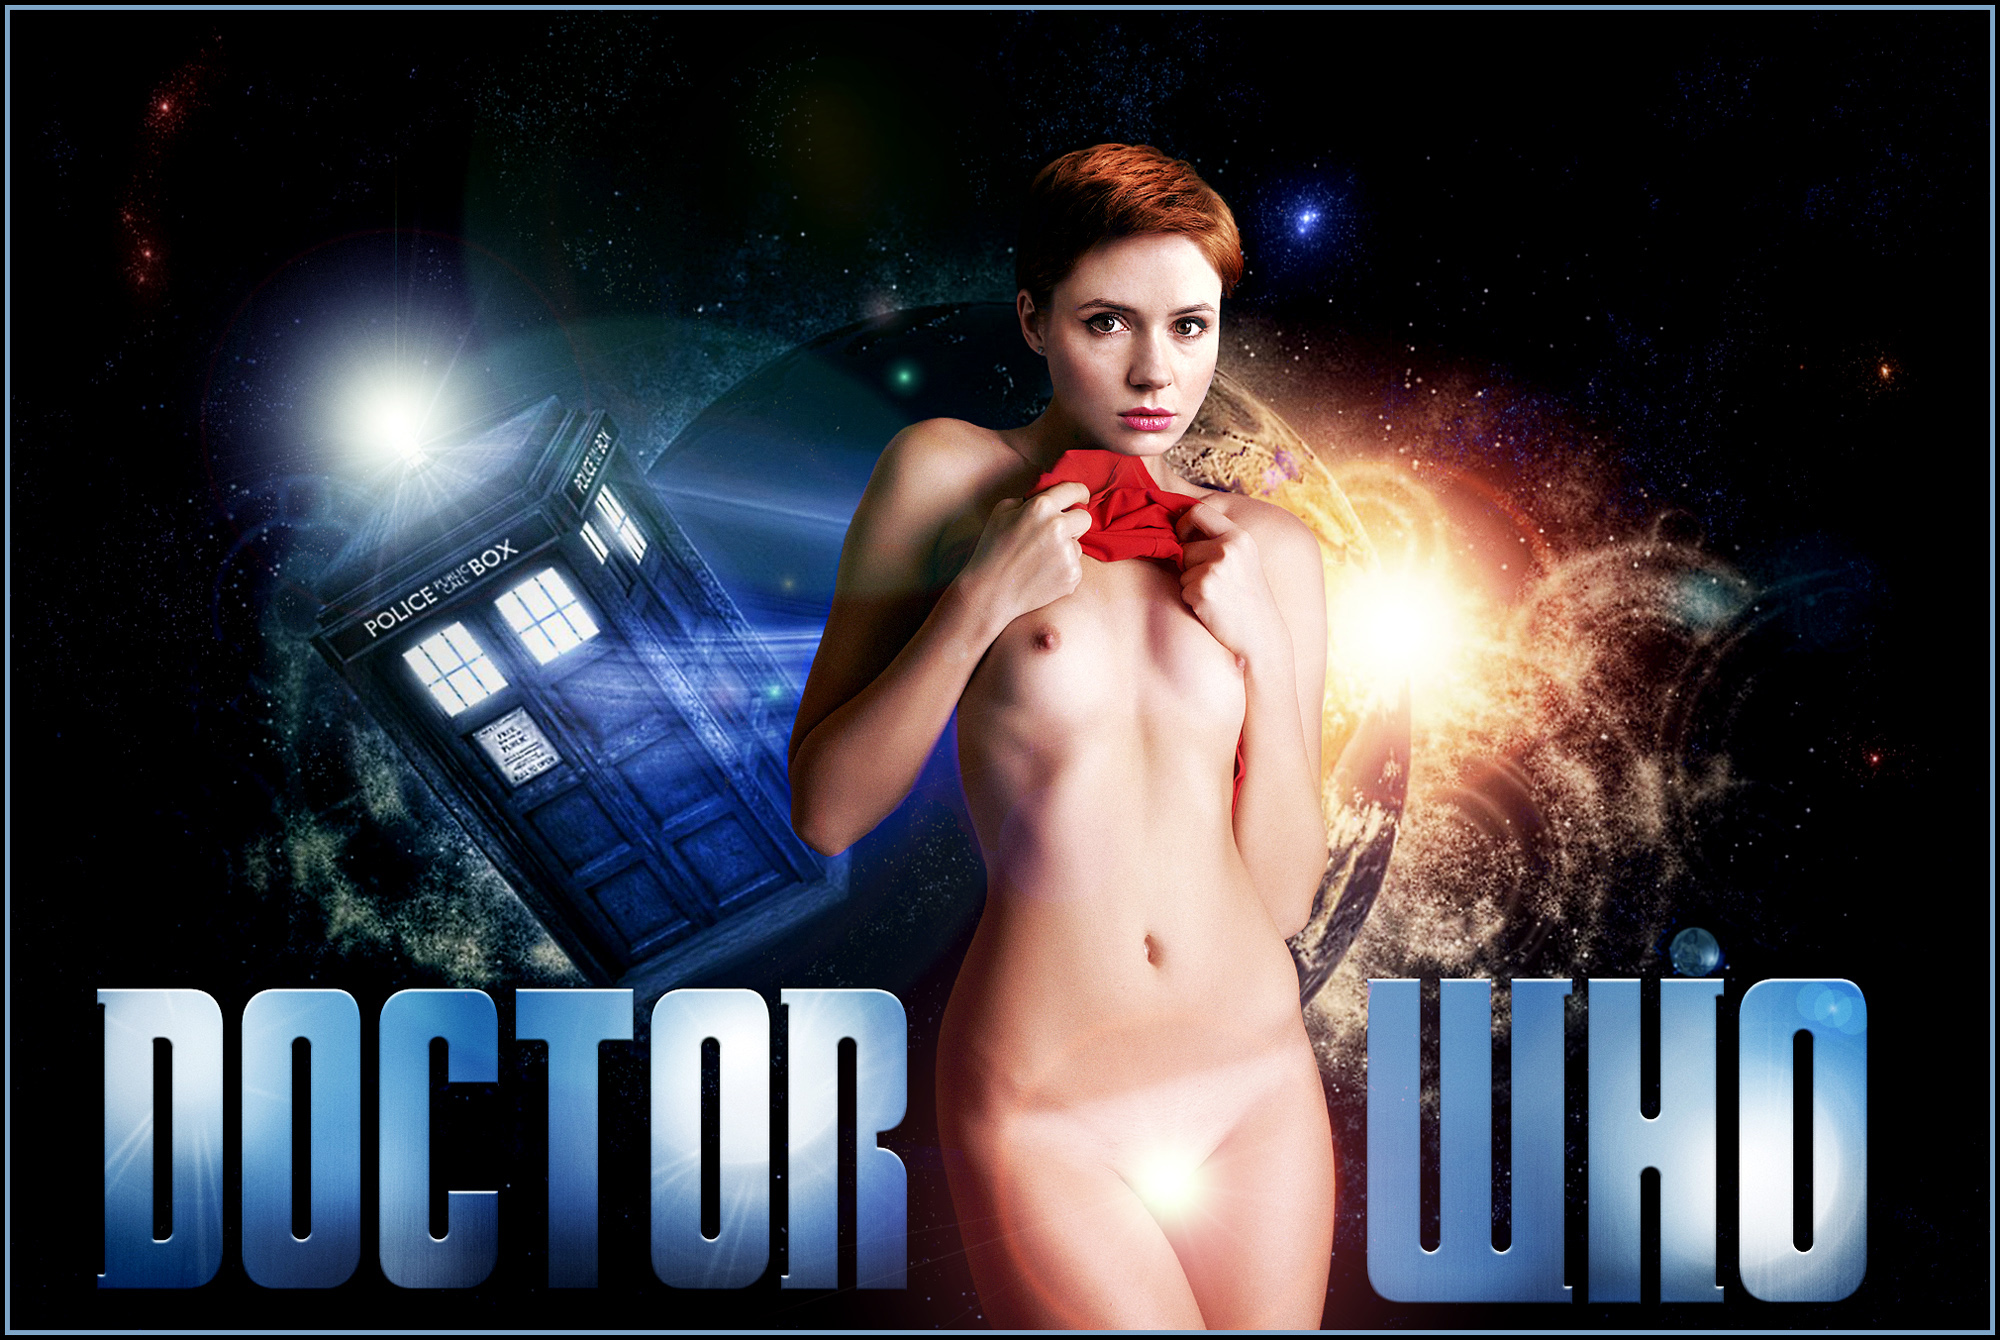 Doctor Who Amy Pond Sexy - Amy Pond is Naked in Space â €" Doctor Who....